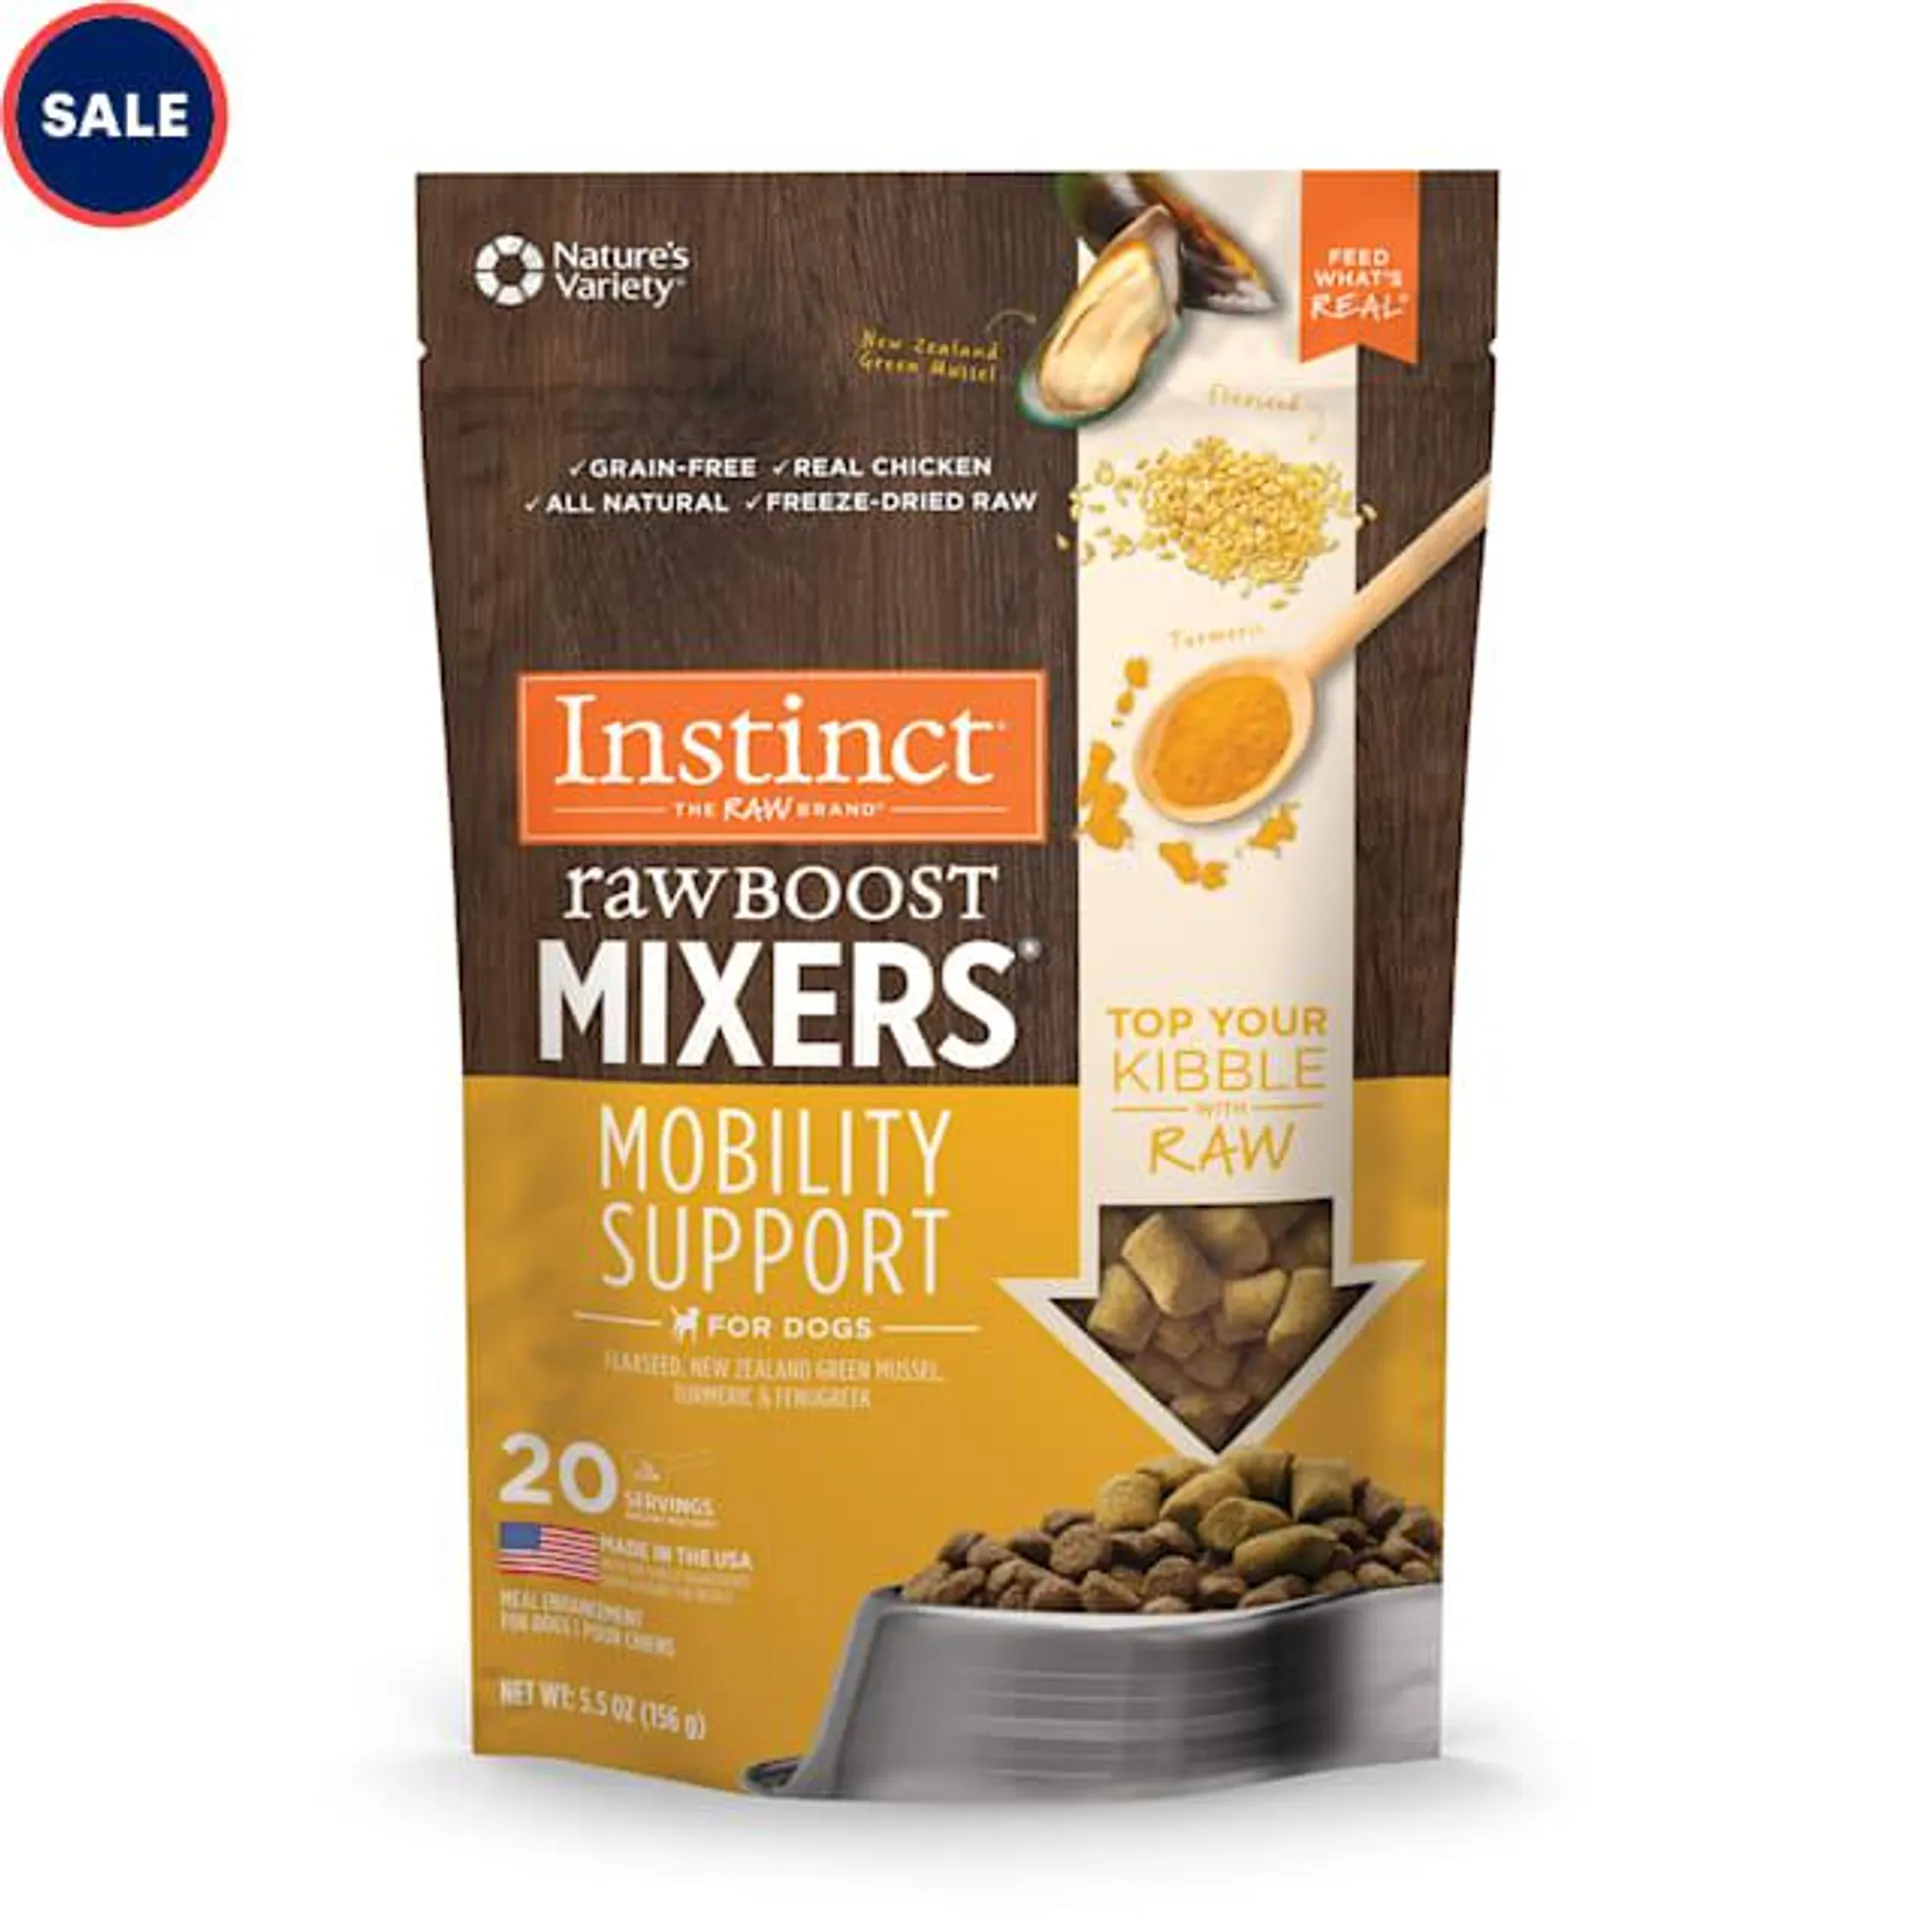 Instinct Freeze Dried Raw Boost Mixers Grain Free Mobility Support Grain Free All Natural Dog Food Topper, 5.5 oz.